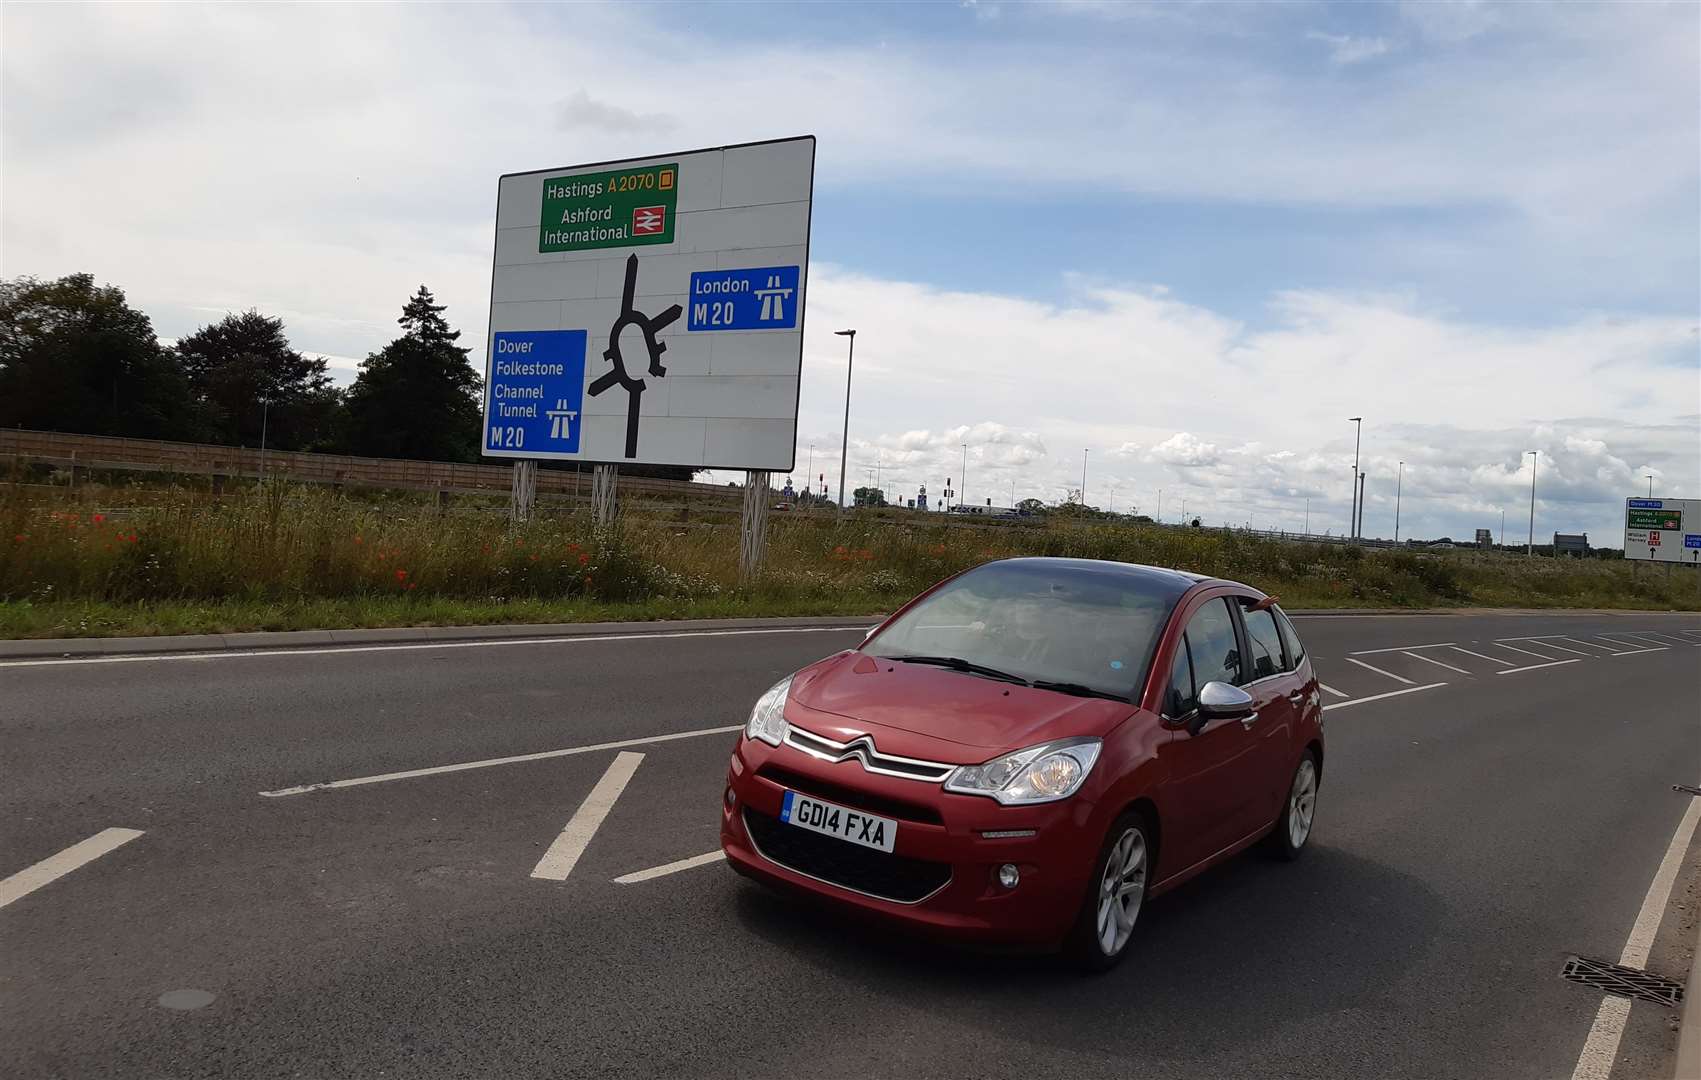 Councillors say the existing signs as "very confusing" for drivers